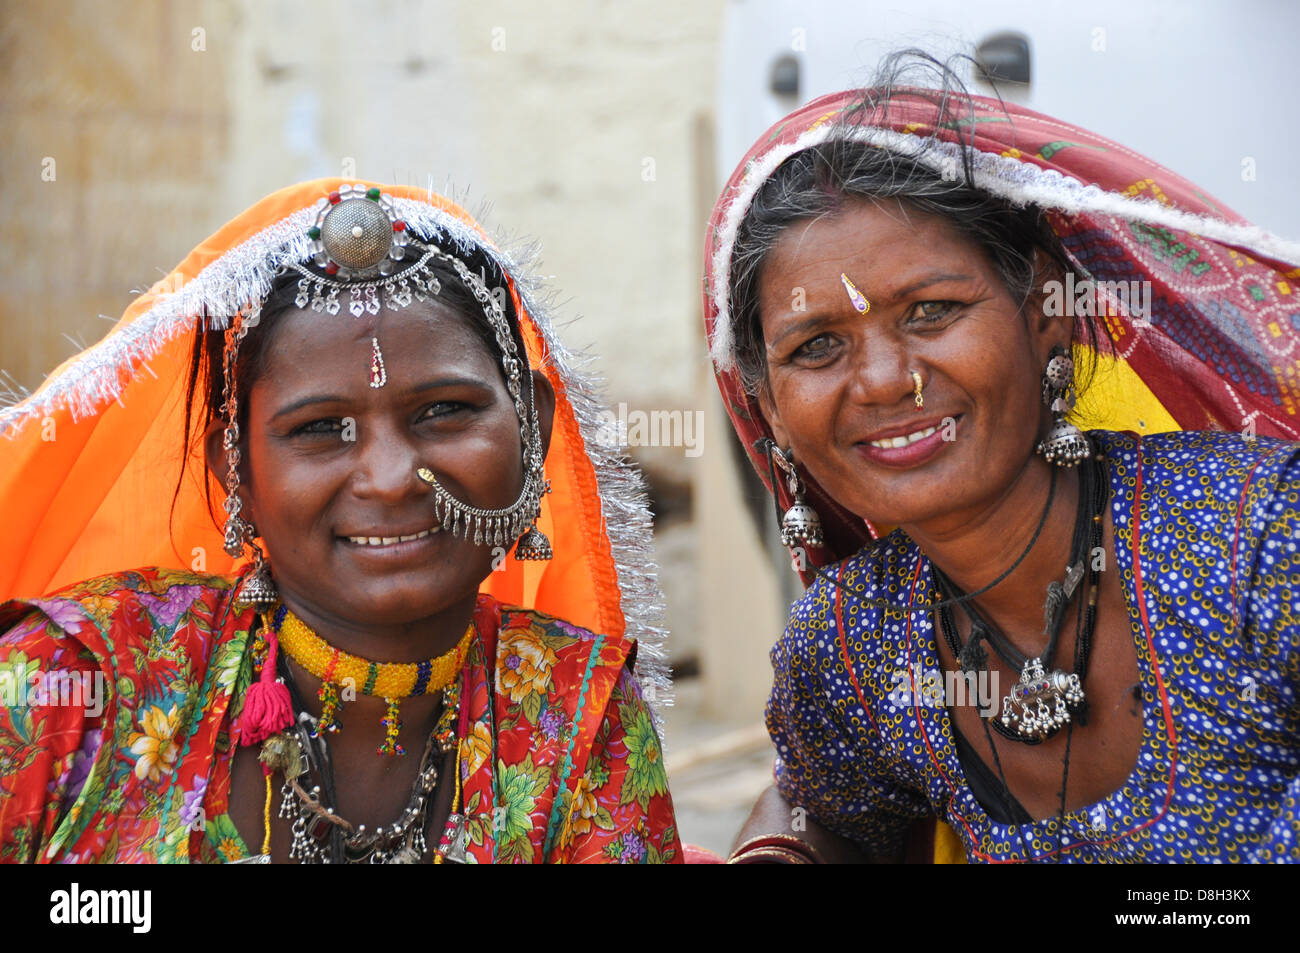 Why Rajasthani Women Wear Colorful Clothes?